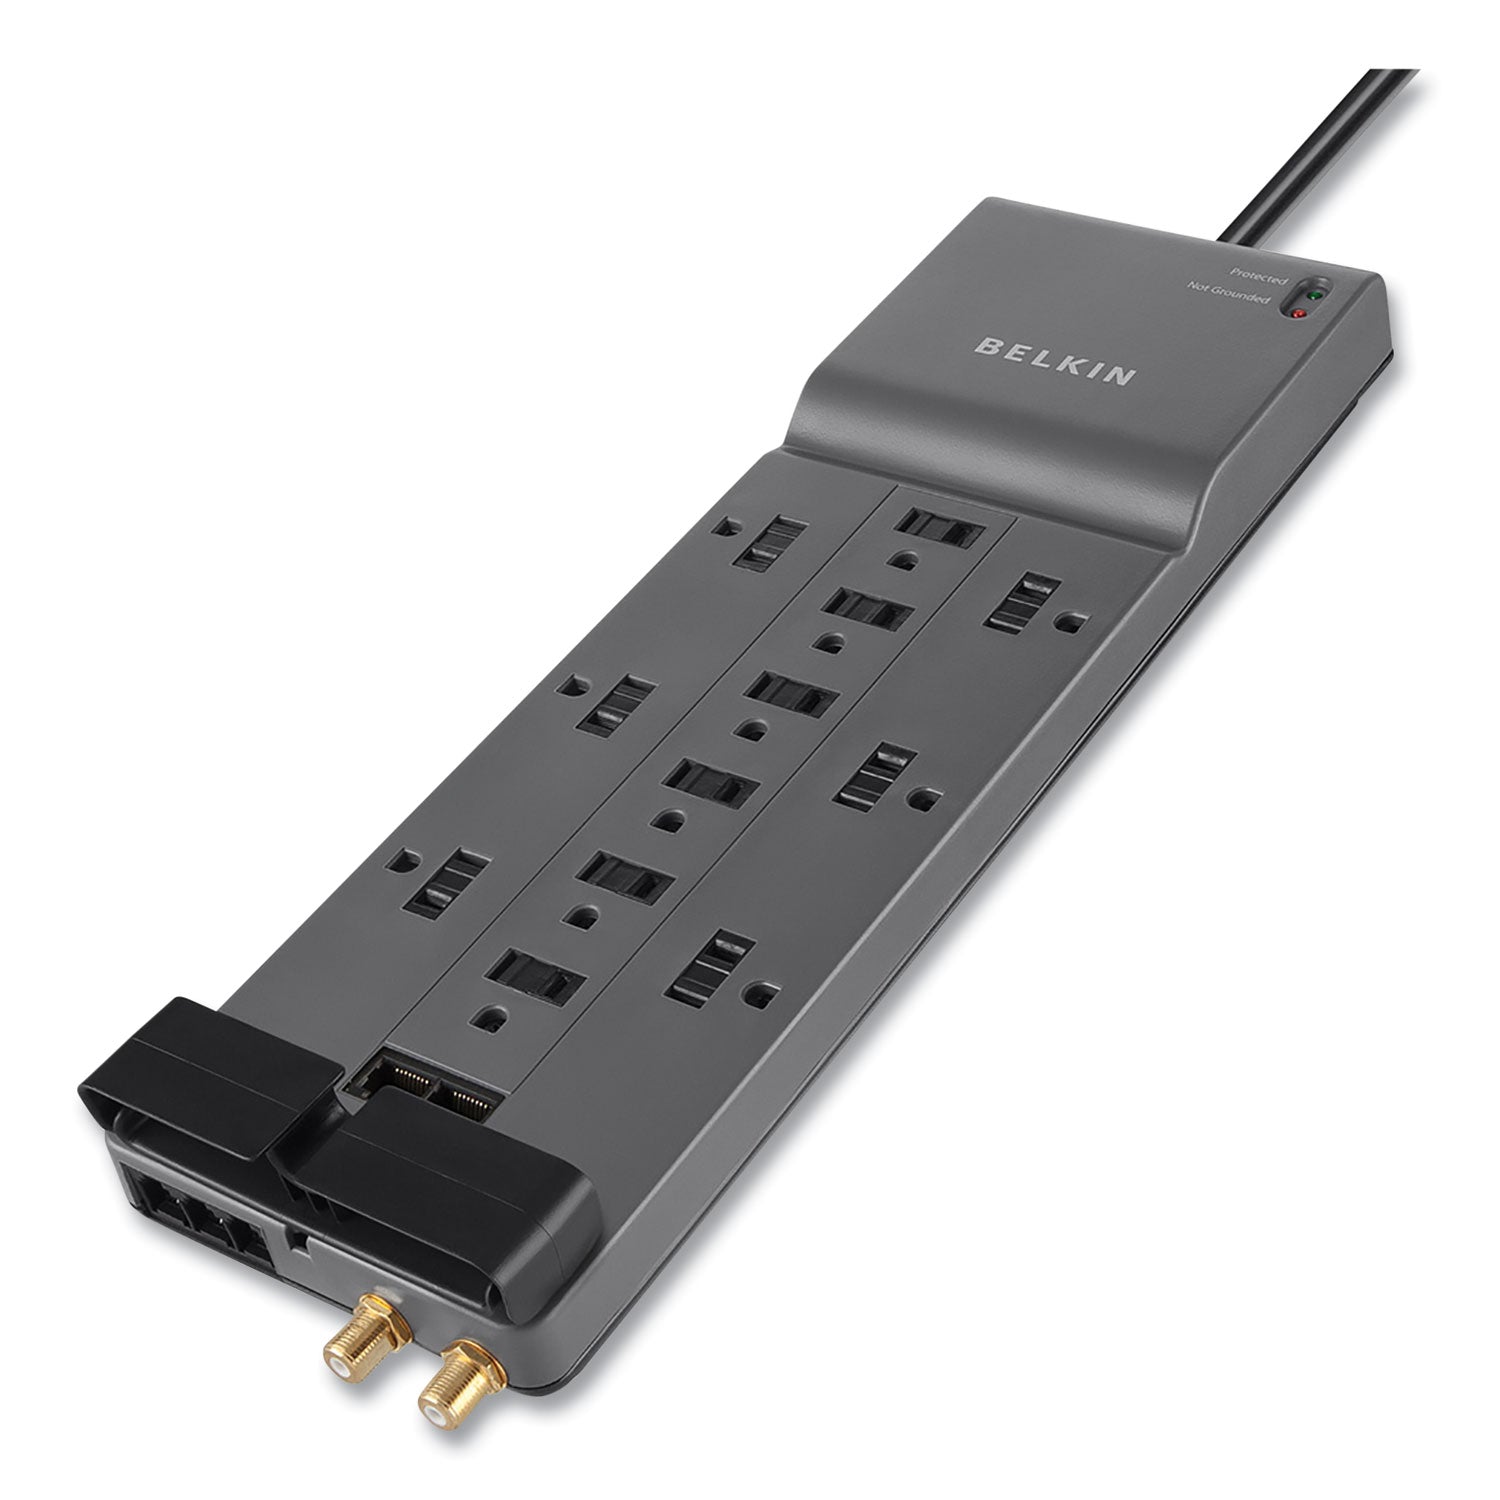 Professional Series SurgeMaster Surge Protector, 12 AC Outlets, 10 ft Cord, 3,996 J, Dark Gray - 